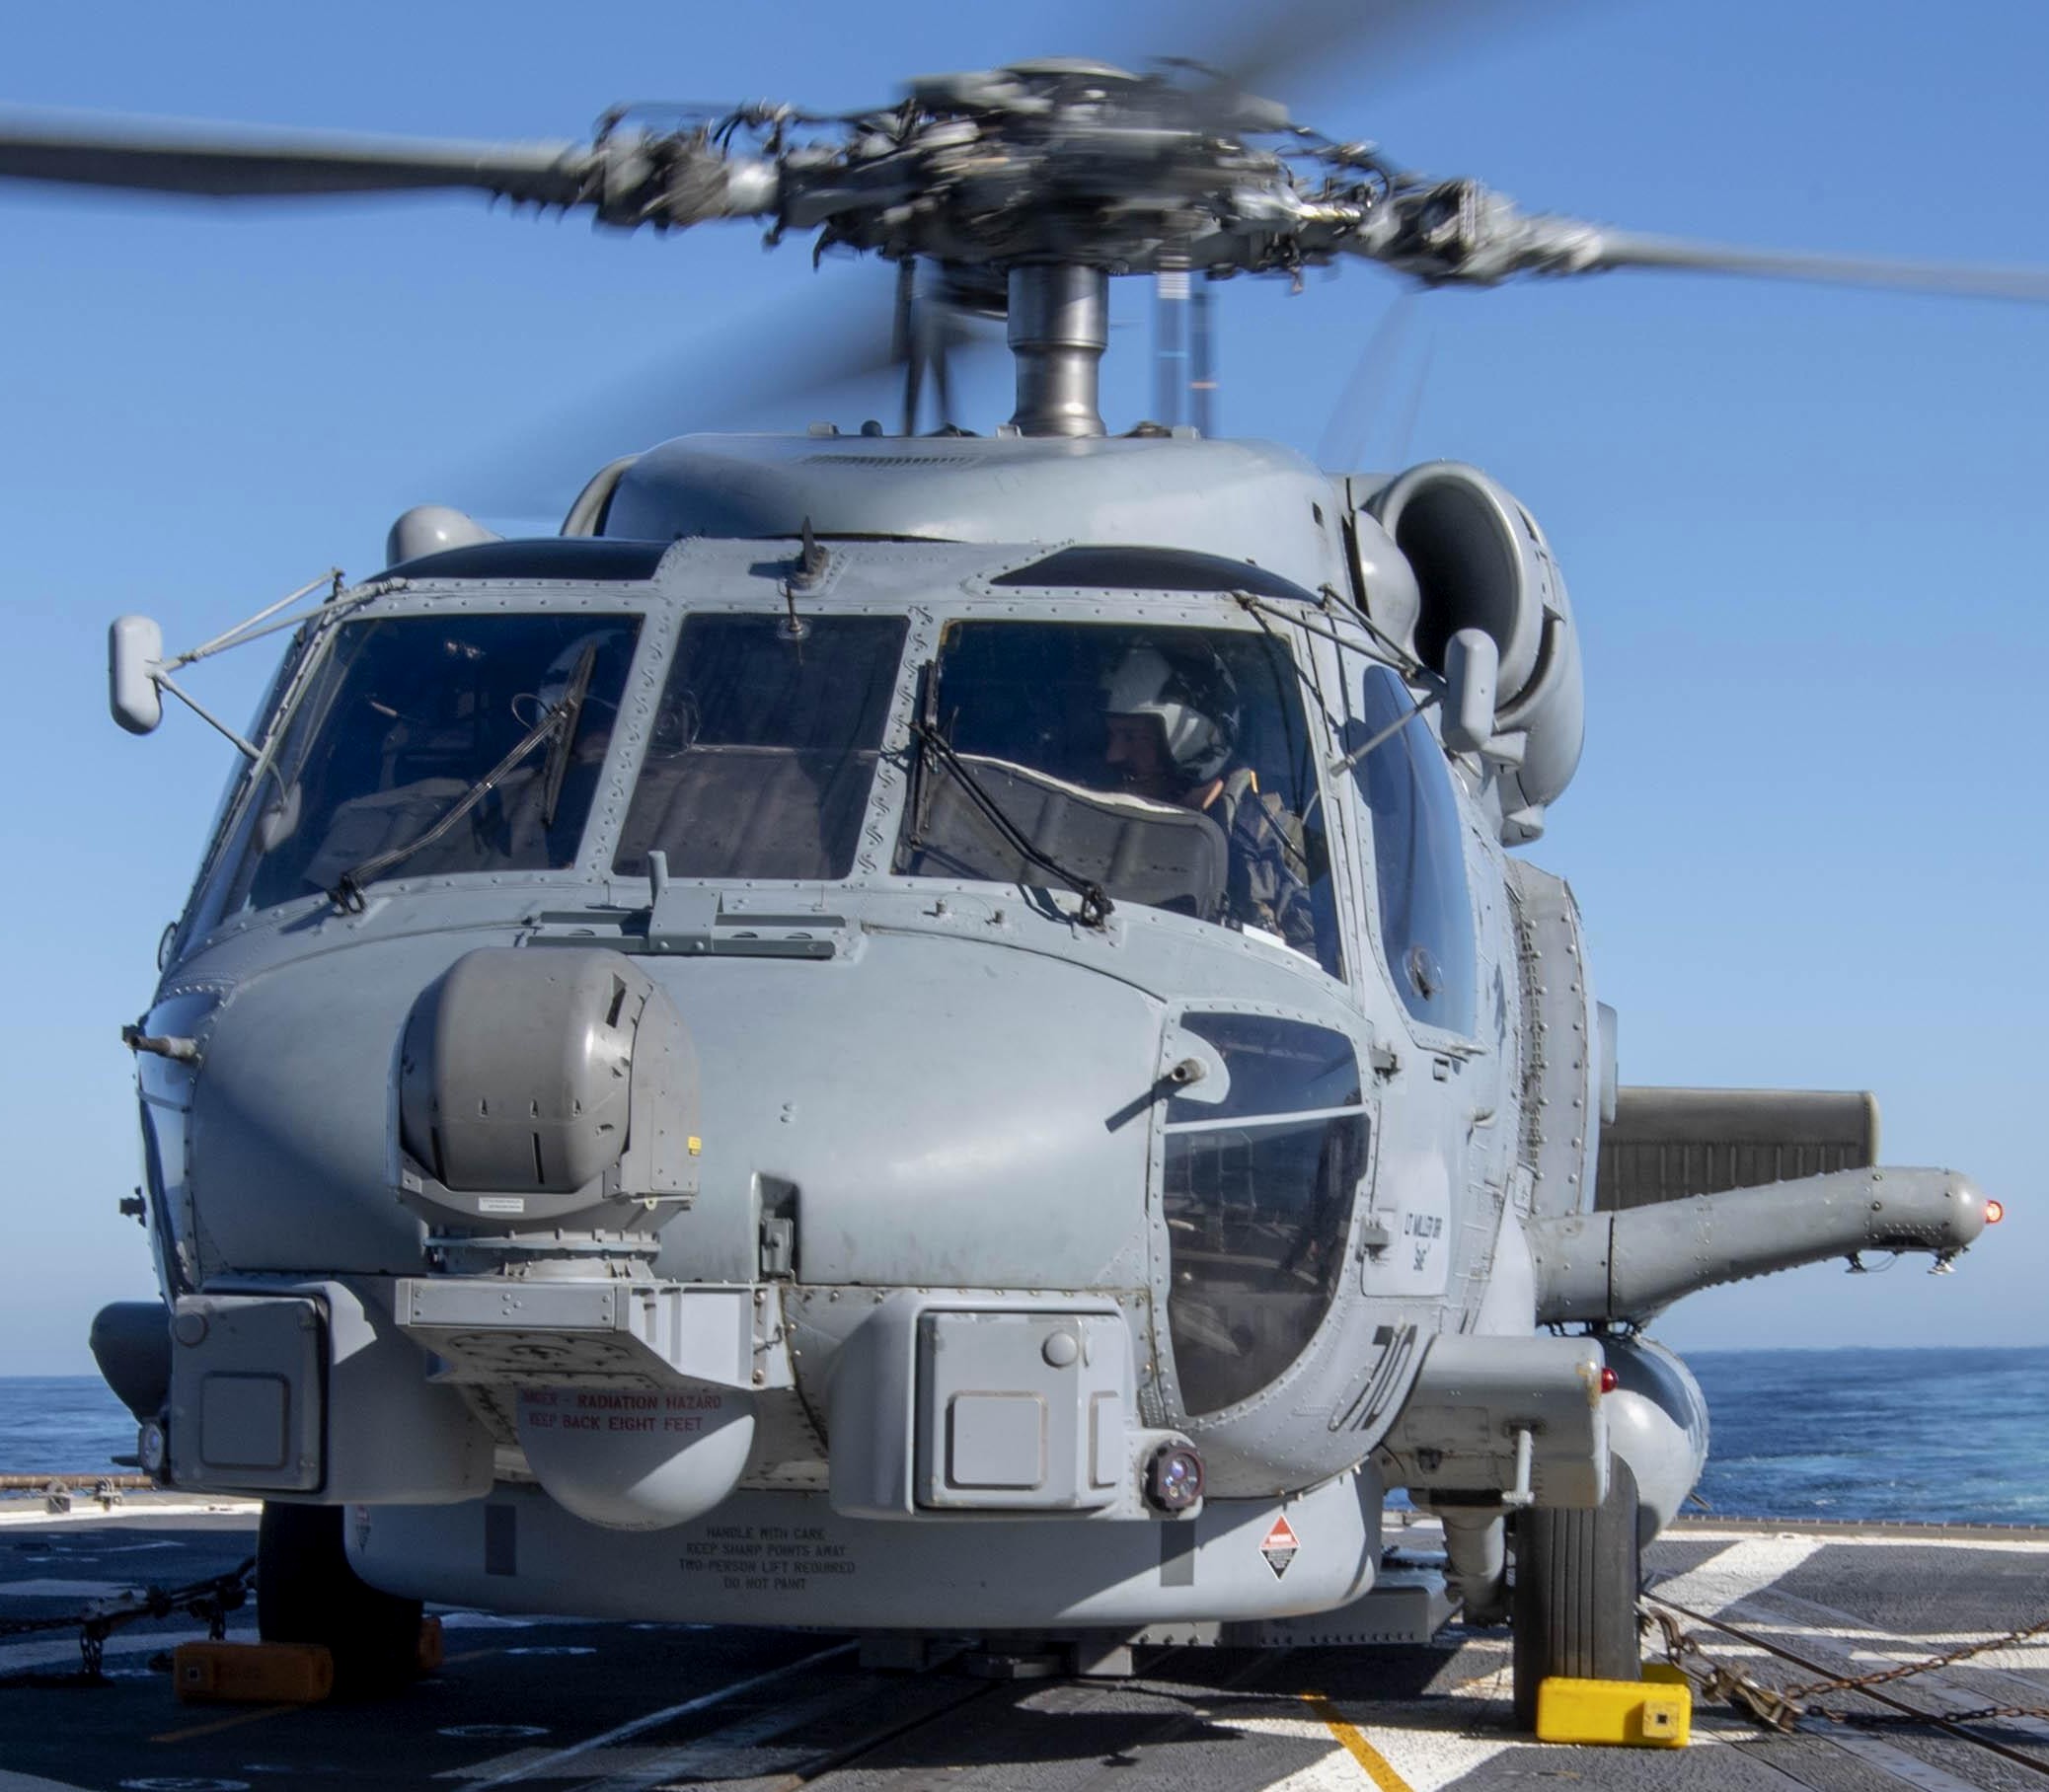 hsm-75 wolf pack helicopter maritime strike squadron mh-60r seahawk cg-52 uss bunker hill 84